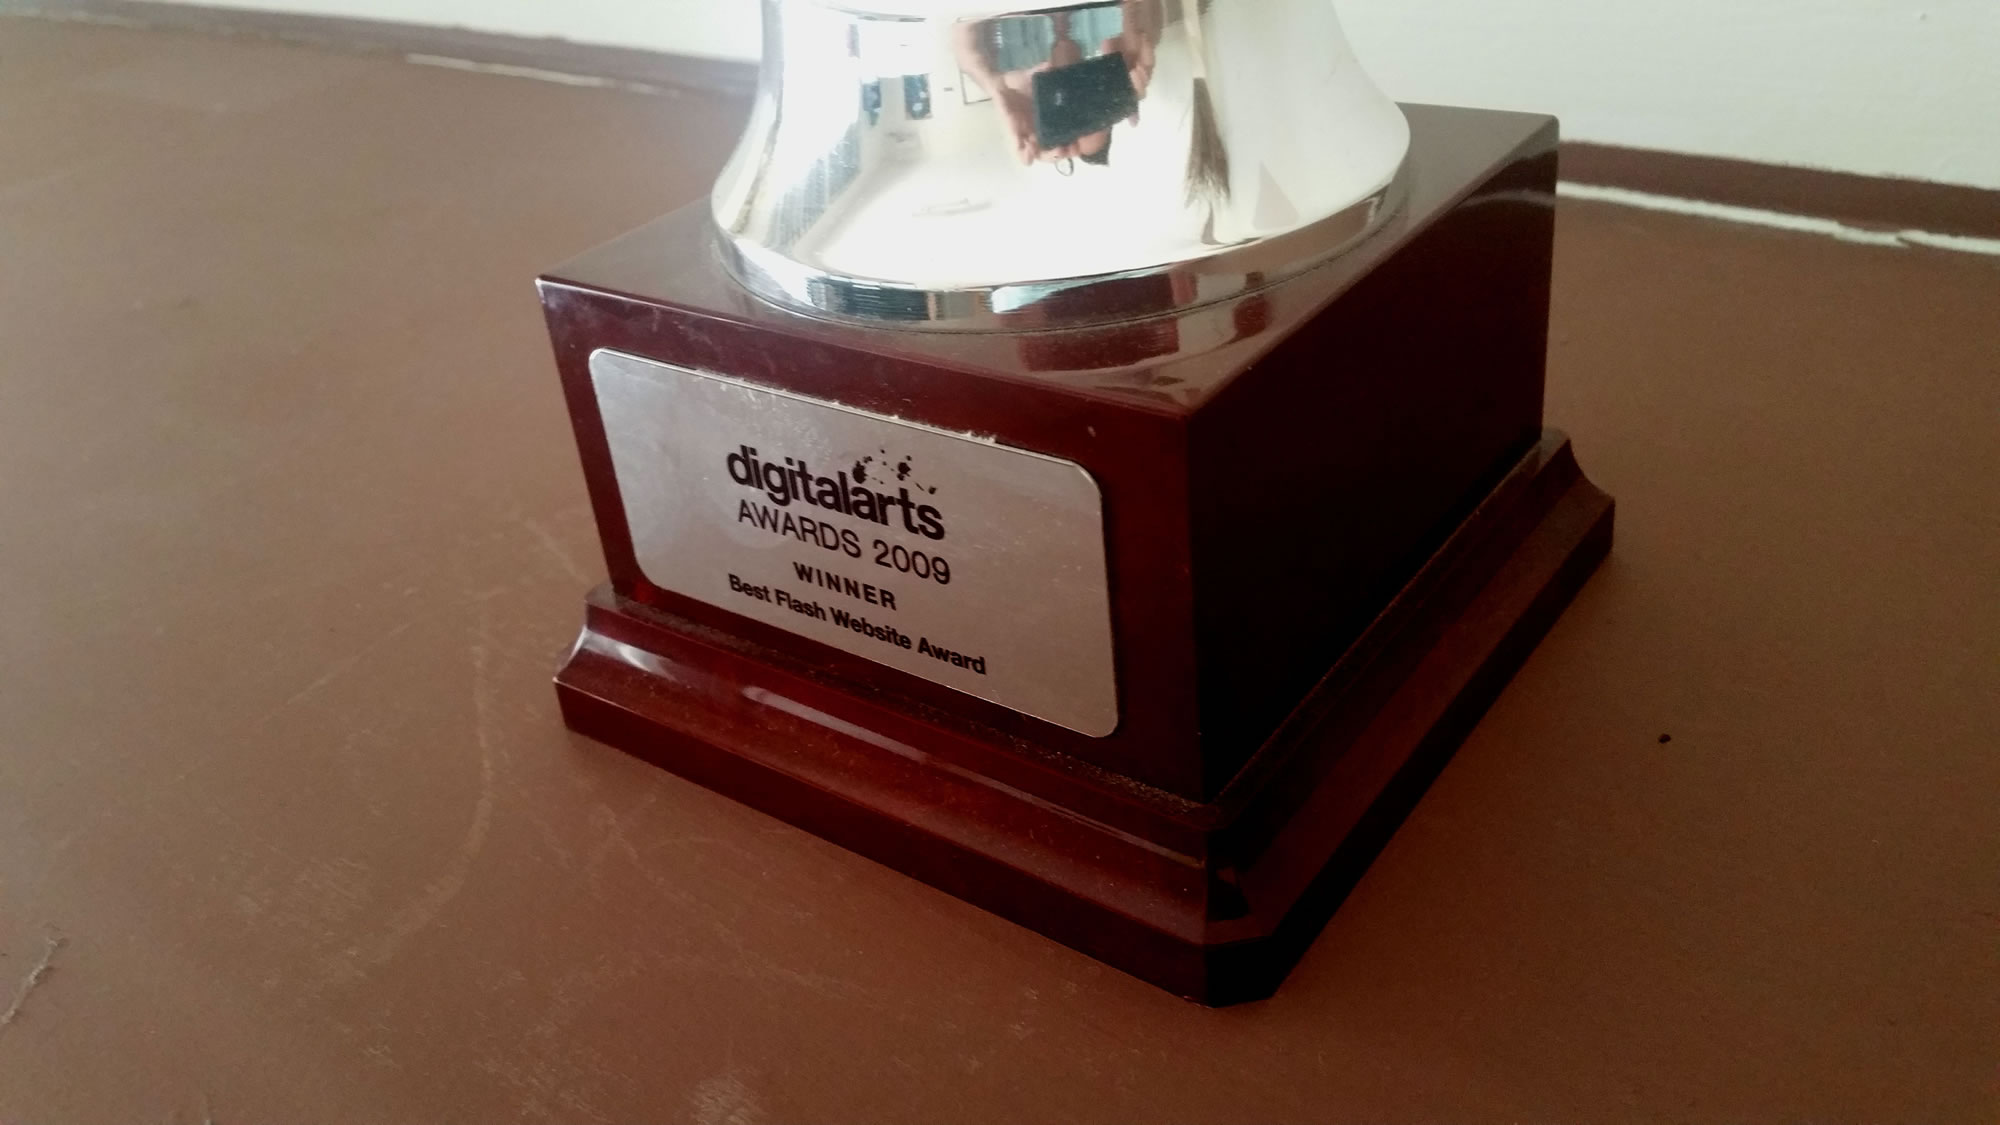 CasaSoft's Best Flash Website Award trophy which was awarded back in 2009 at the Digital Arts Awards 2009.